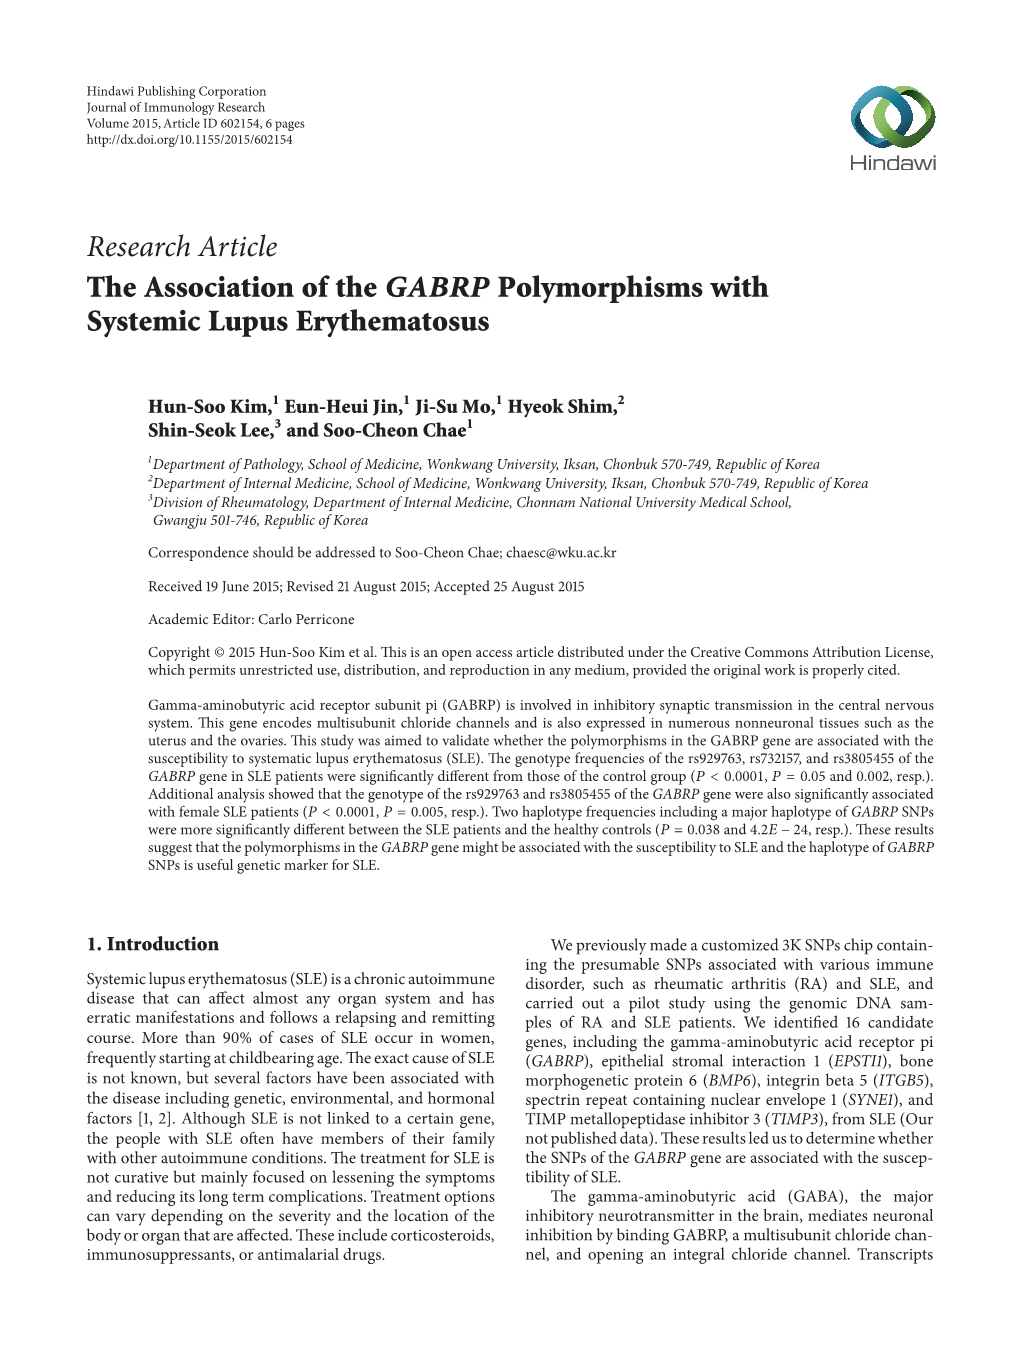 Research Article the Association of the GABRP Polymorphisms with Systemic Lupus Erythematosus